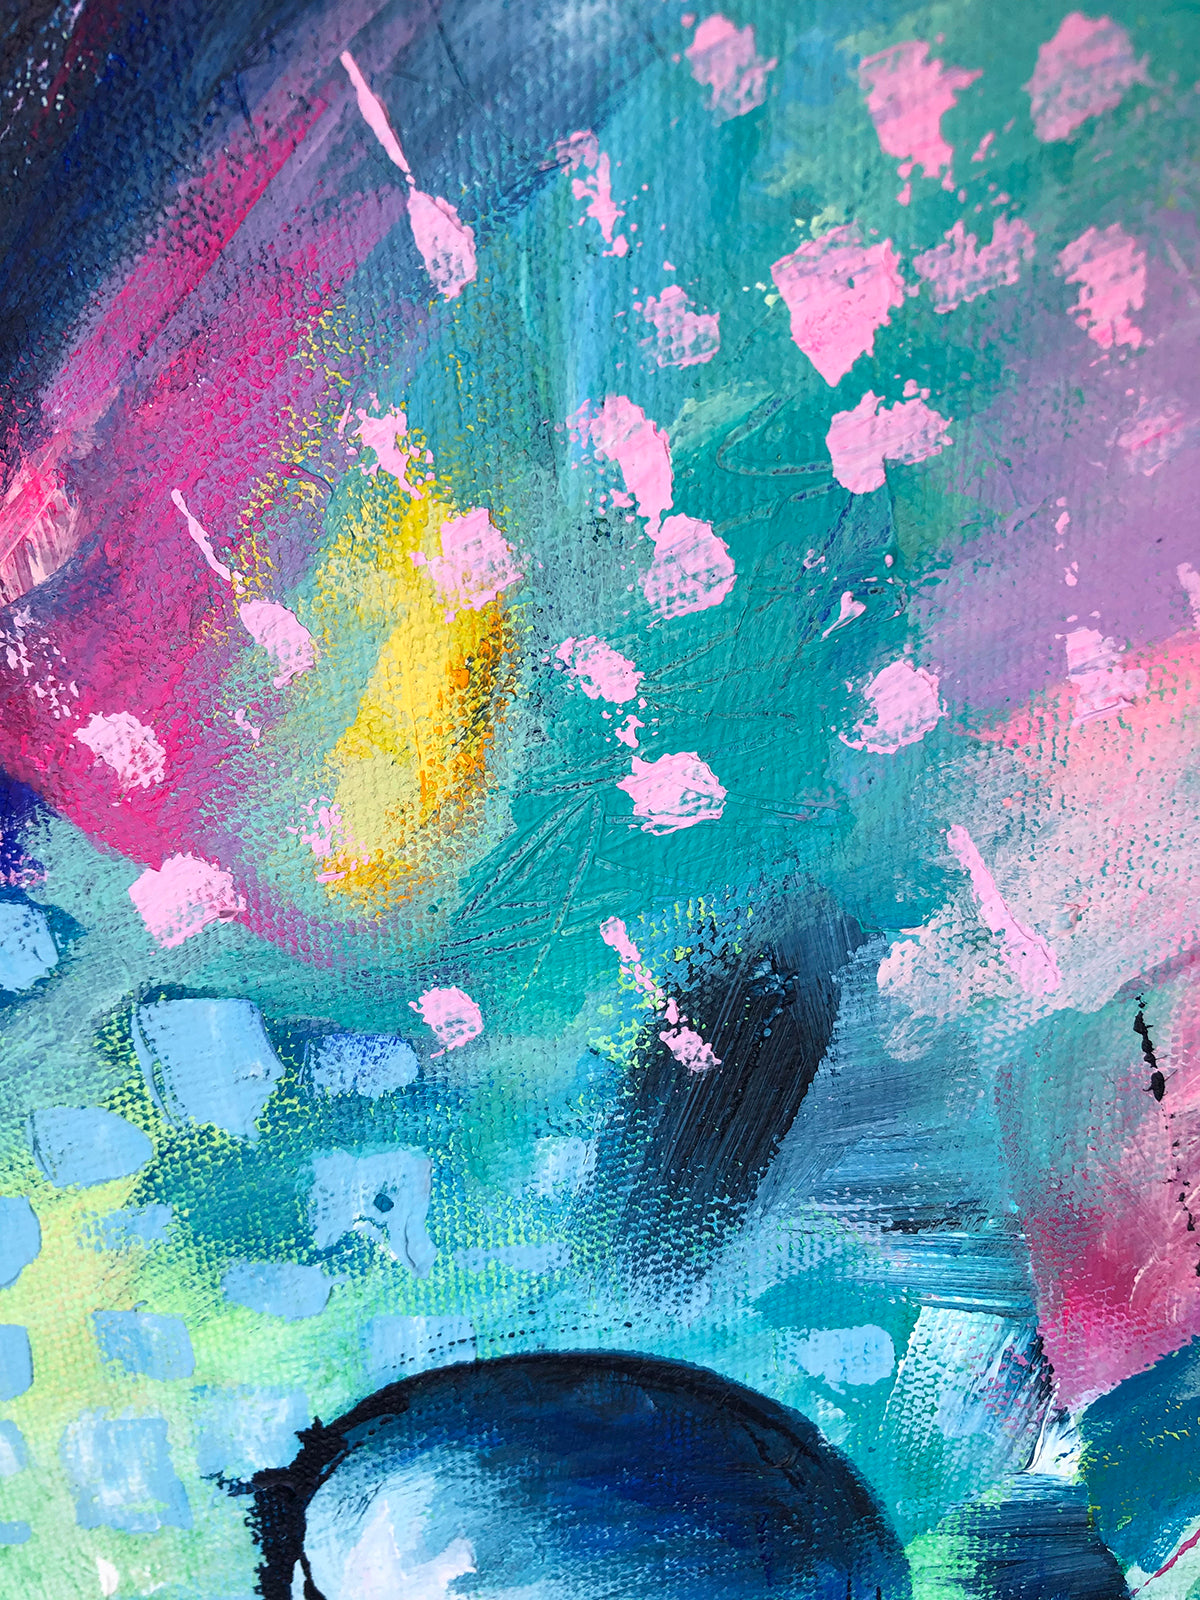 Turquoise and pink close-up detail of colourful abstract painting called Awakening by artist Melanie Howells.